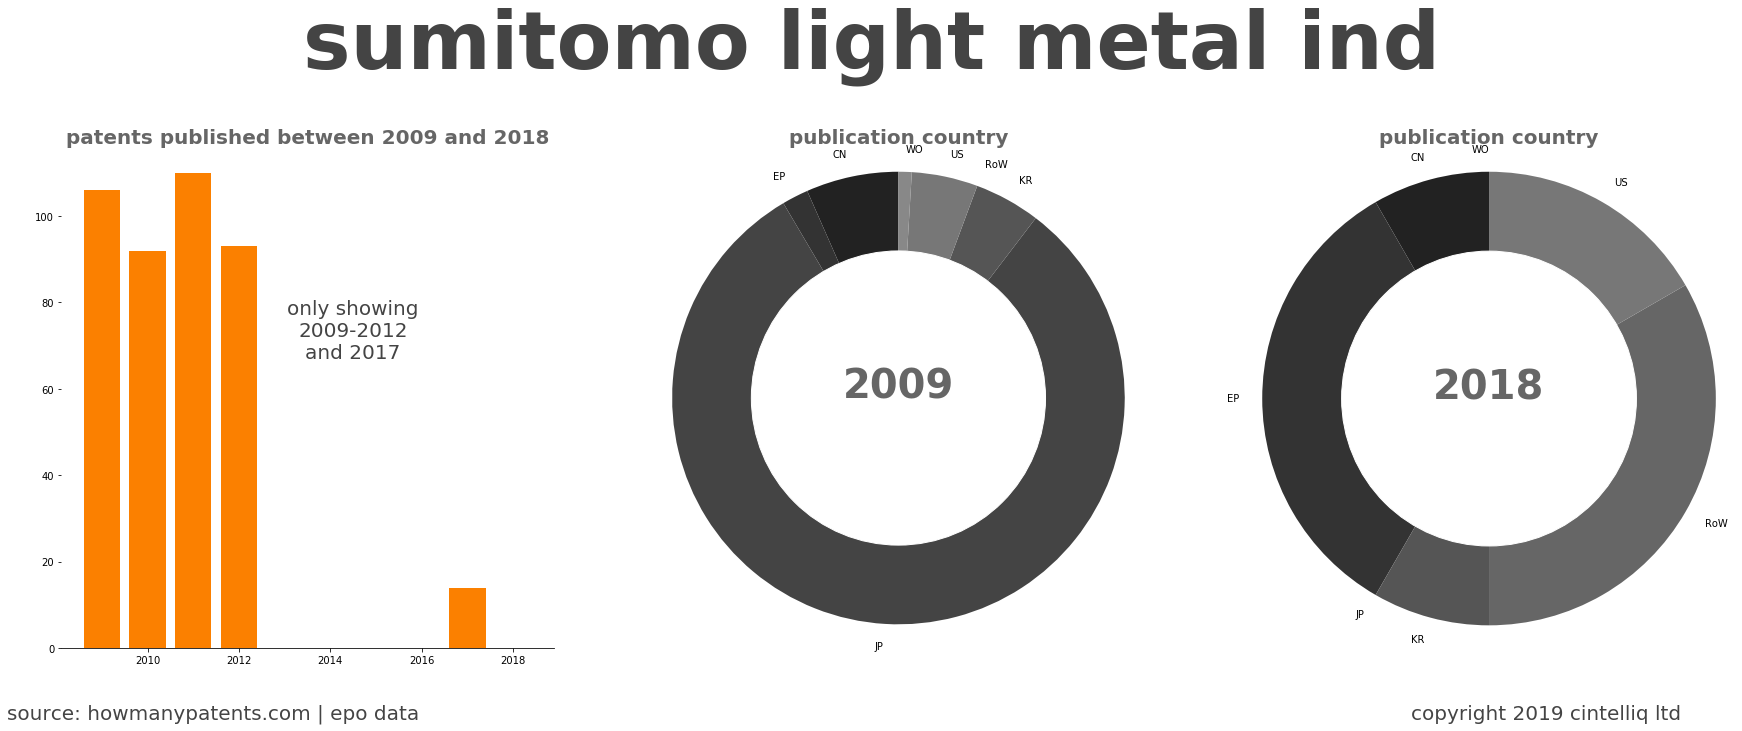 summary of patents for Sumitomo Light Metal Ind